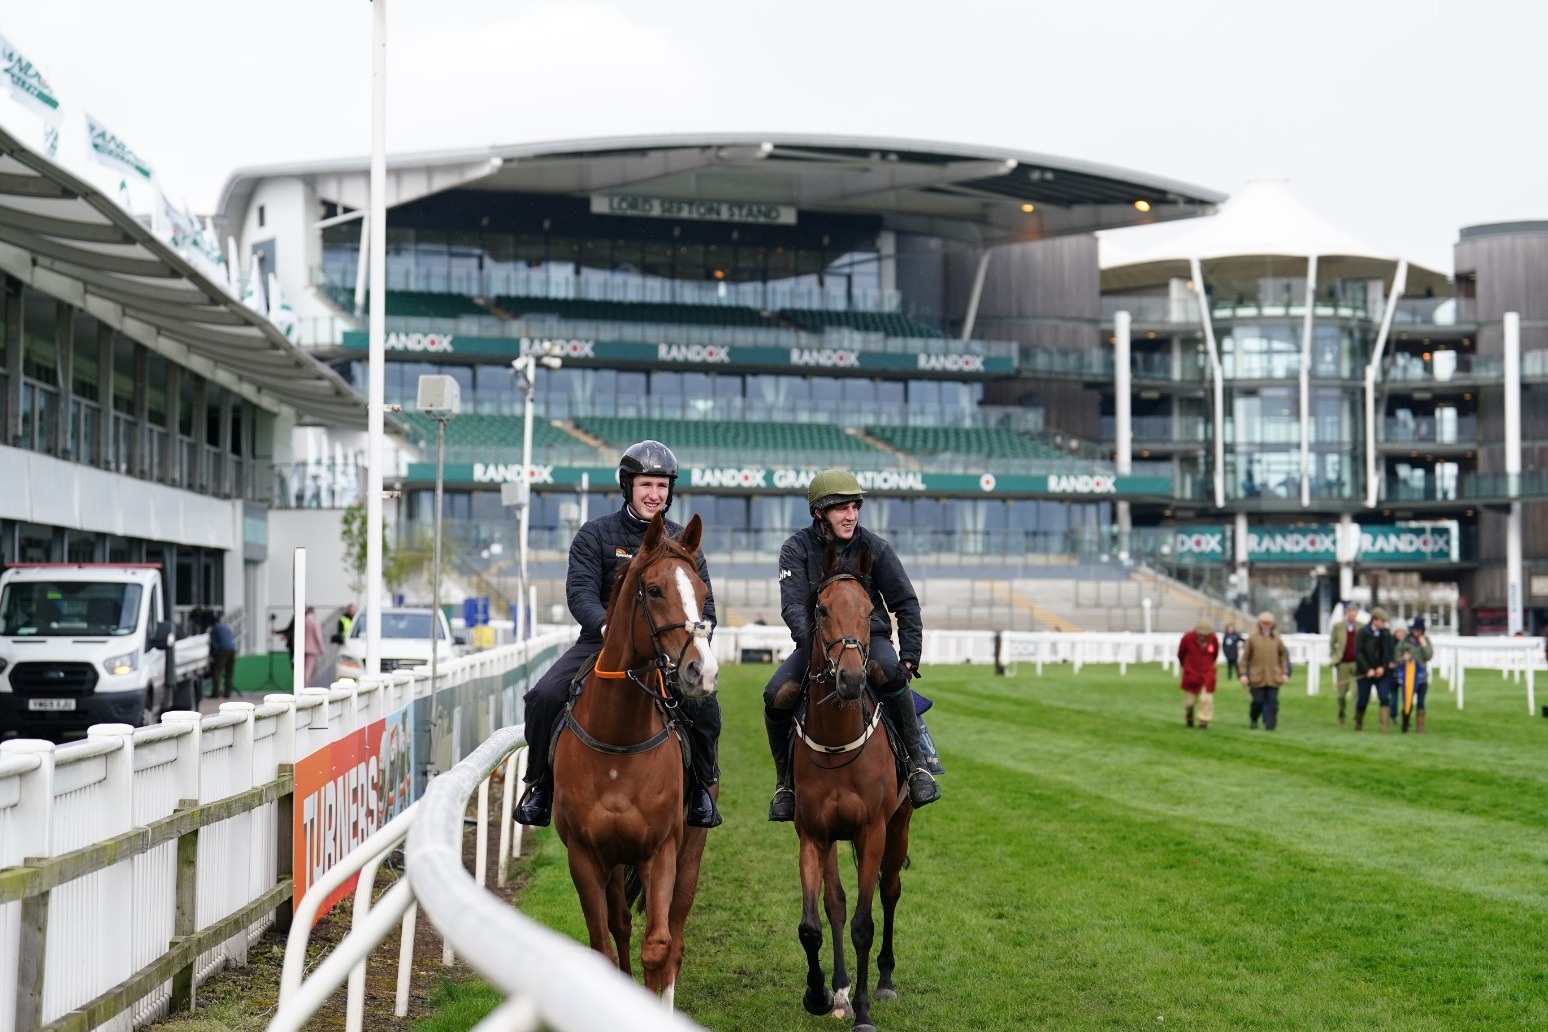 Activists plan to scale Aintree’s fences onto Grand National track 